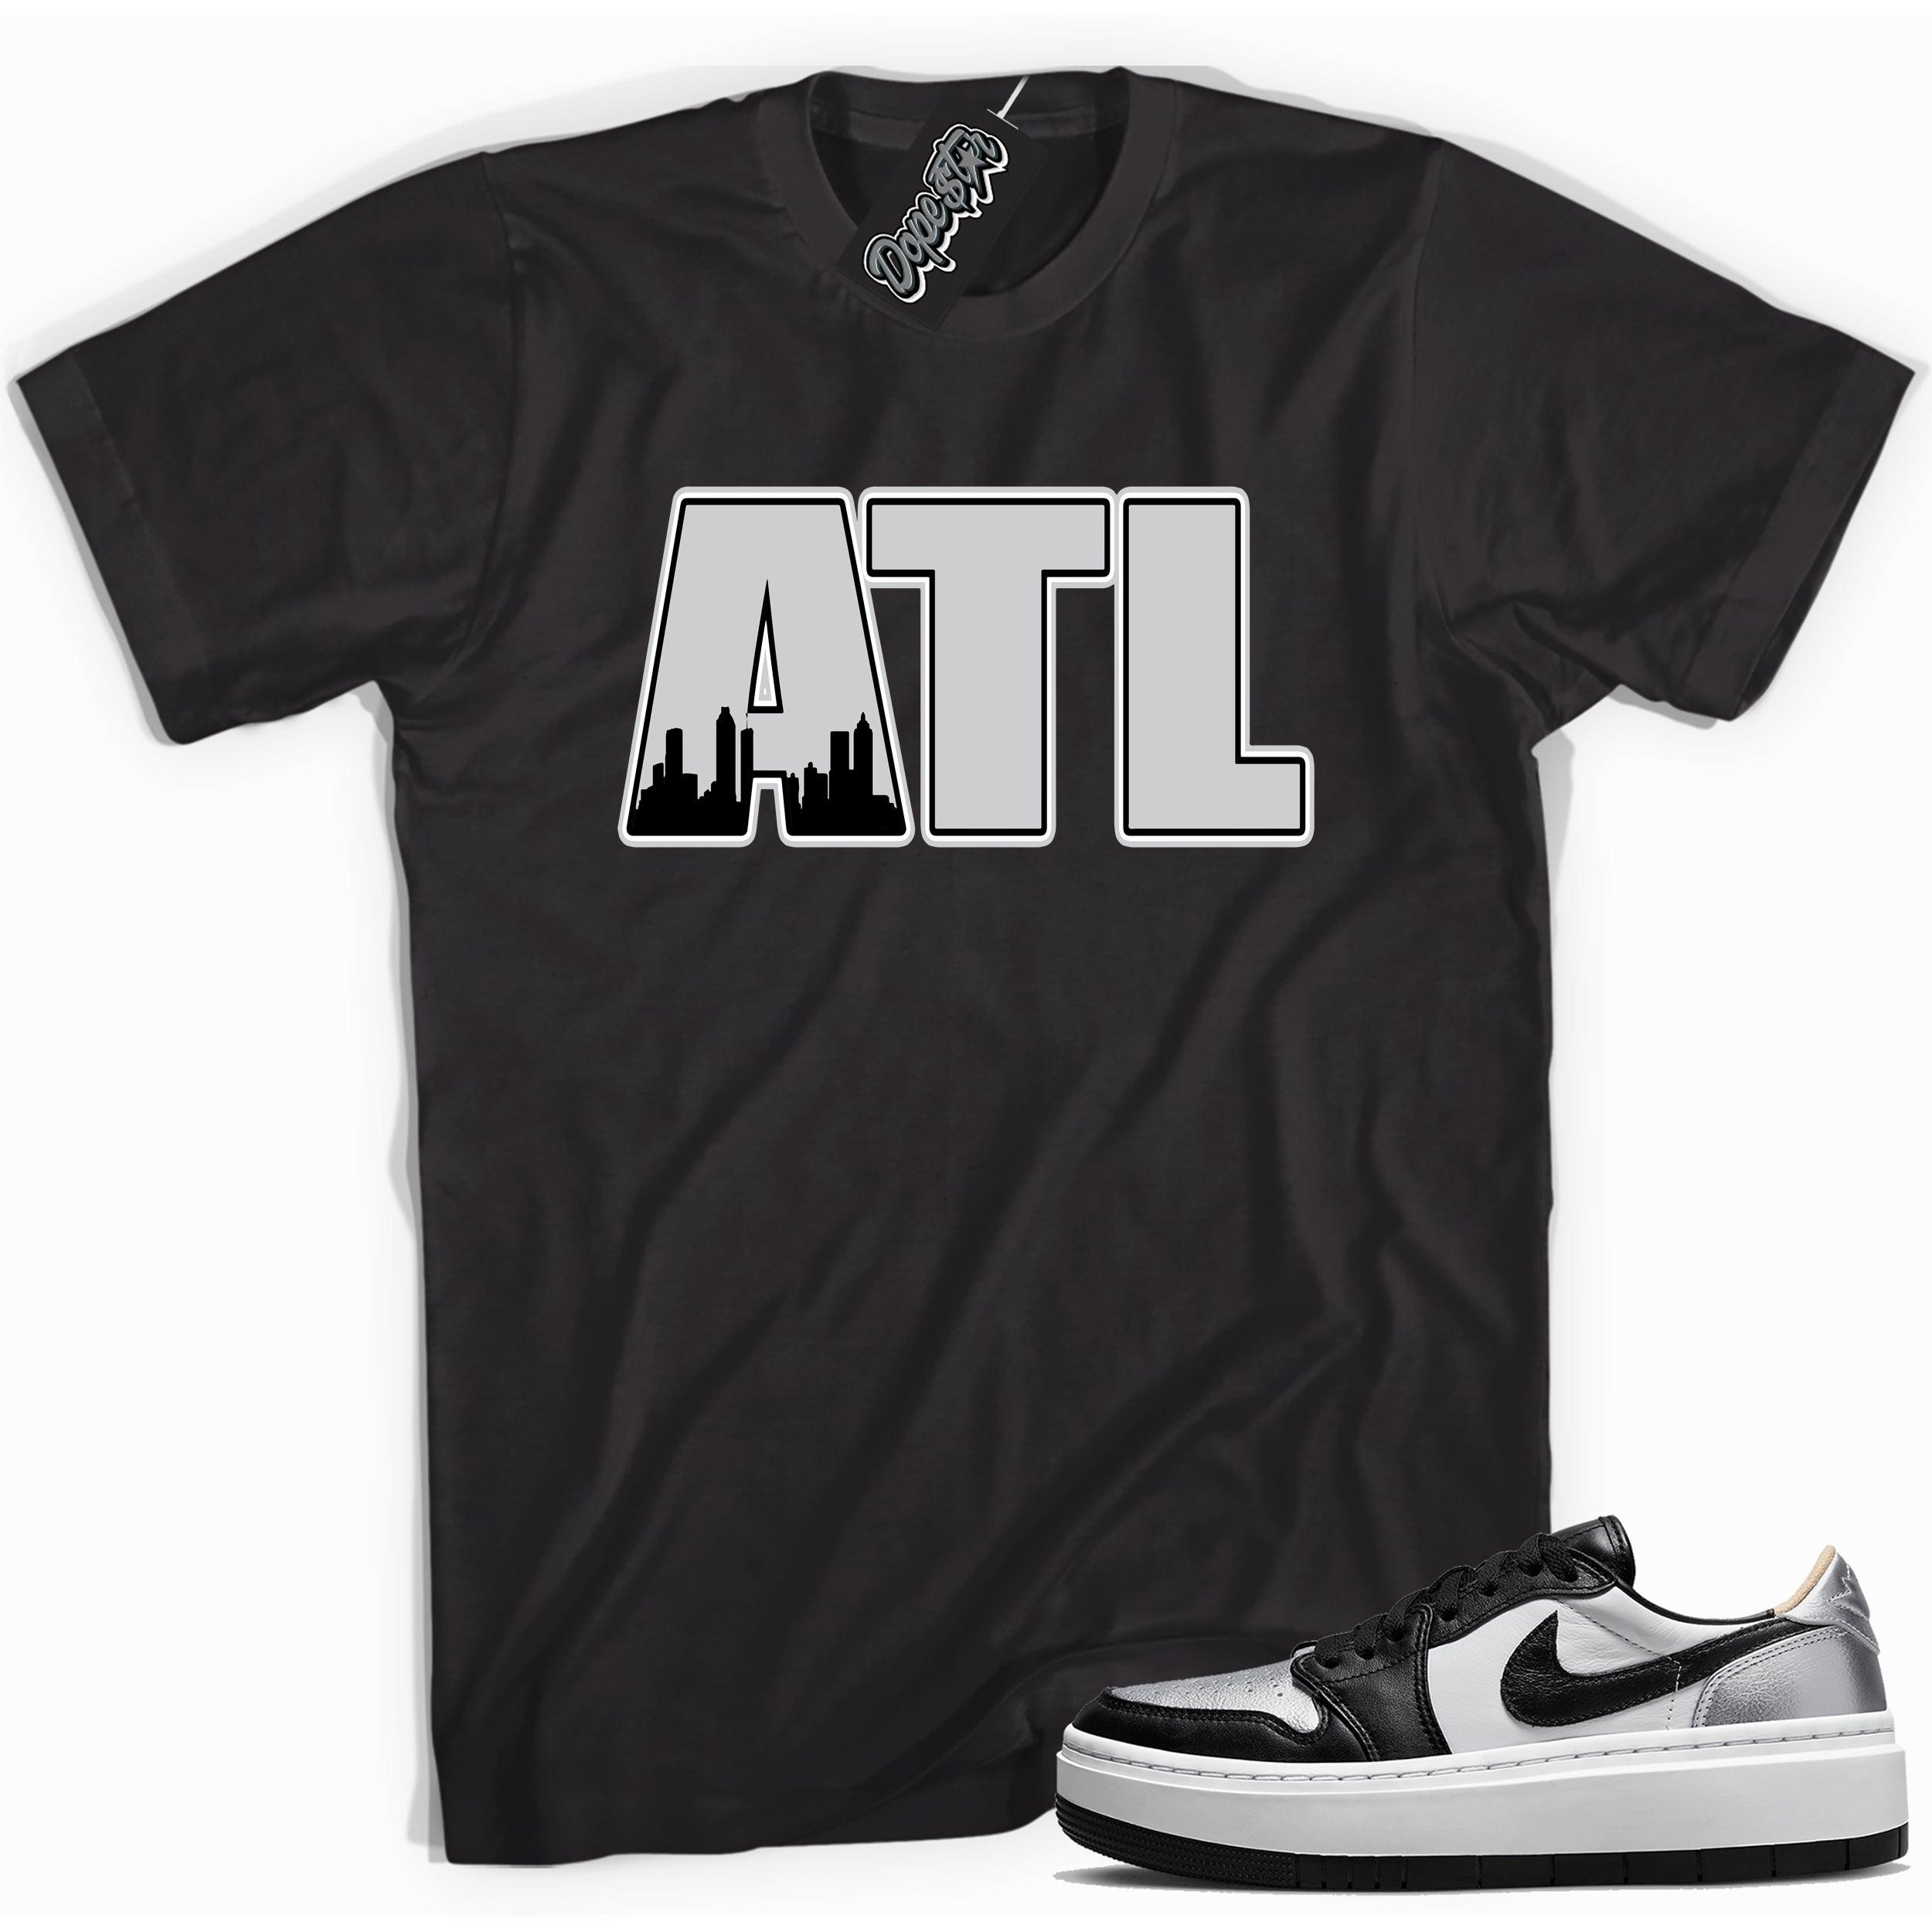 Cool black graphic tee with 'ATL Atlanta' print, that perfectly matches Air Jordan 1 Elevate Low SE Silver Toe sneakers.